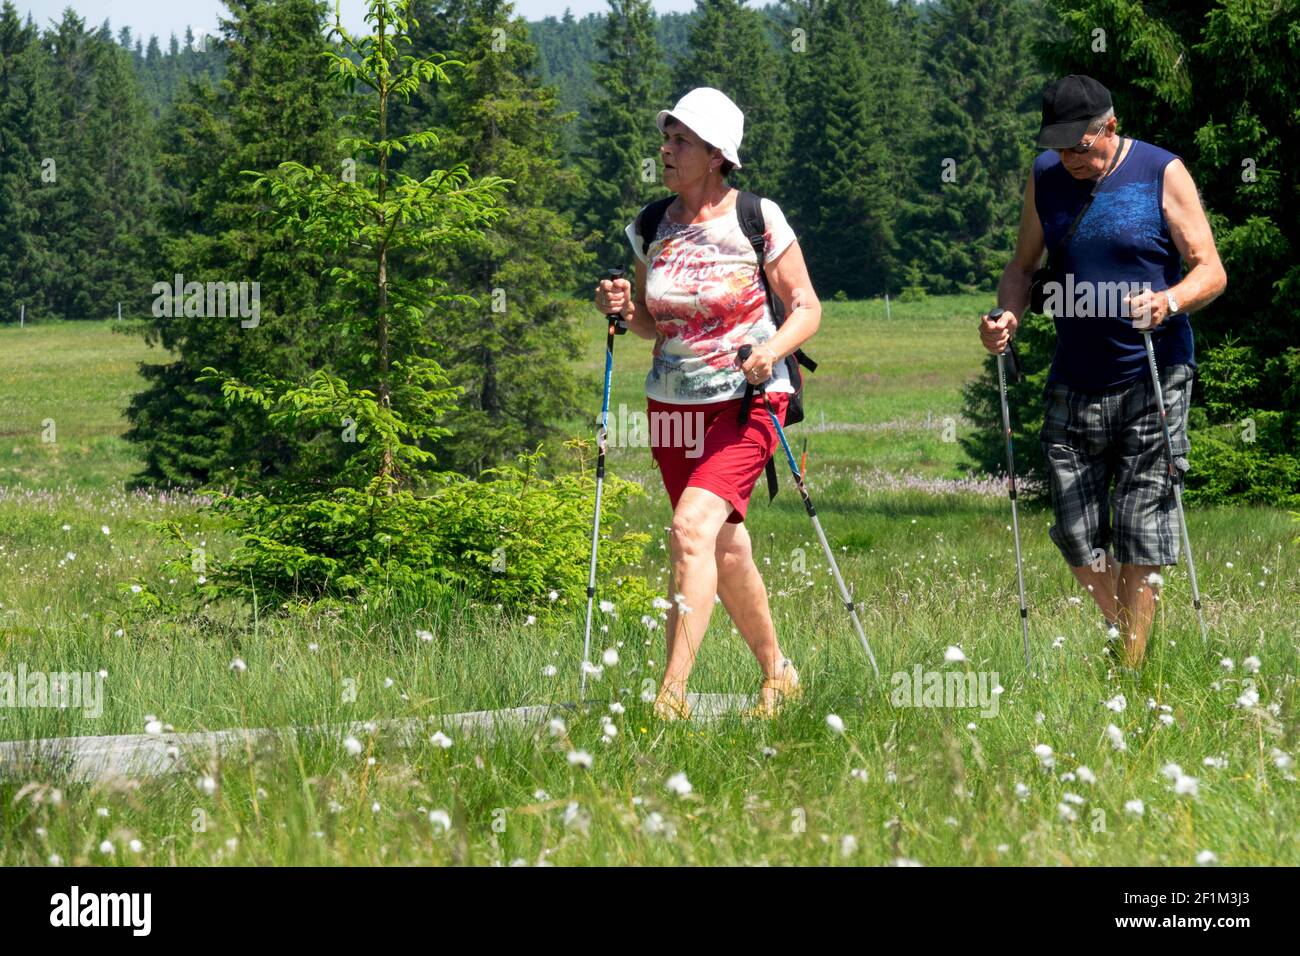 Elderly nordic walking Healthy lifestyle people aging couple Man woman in nature Stock Photo